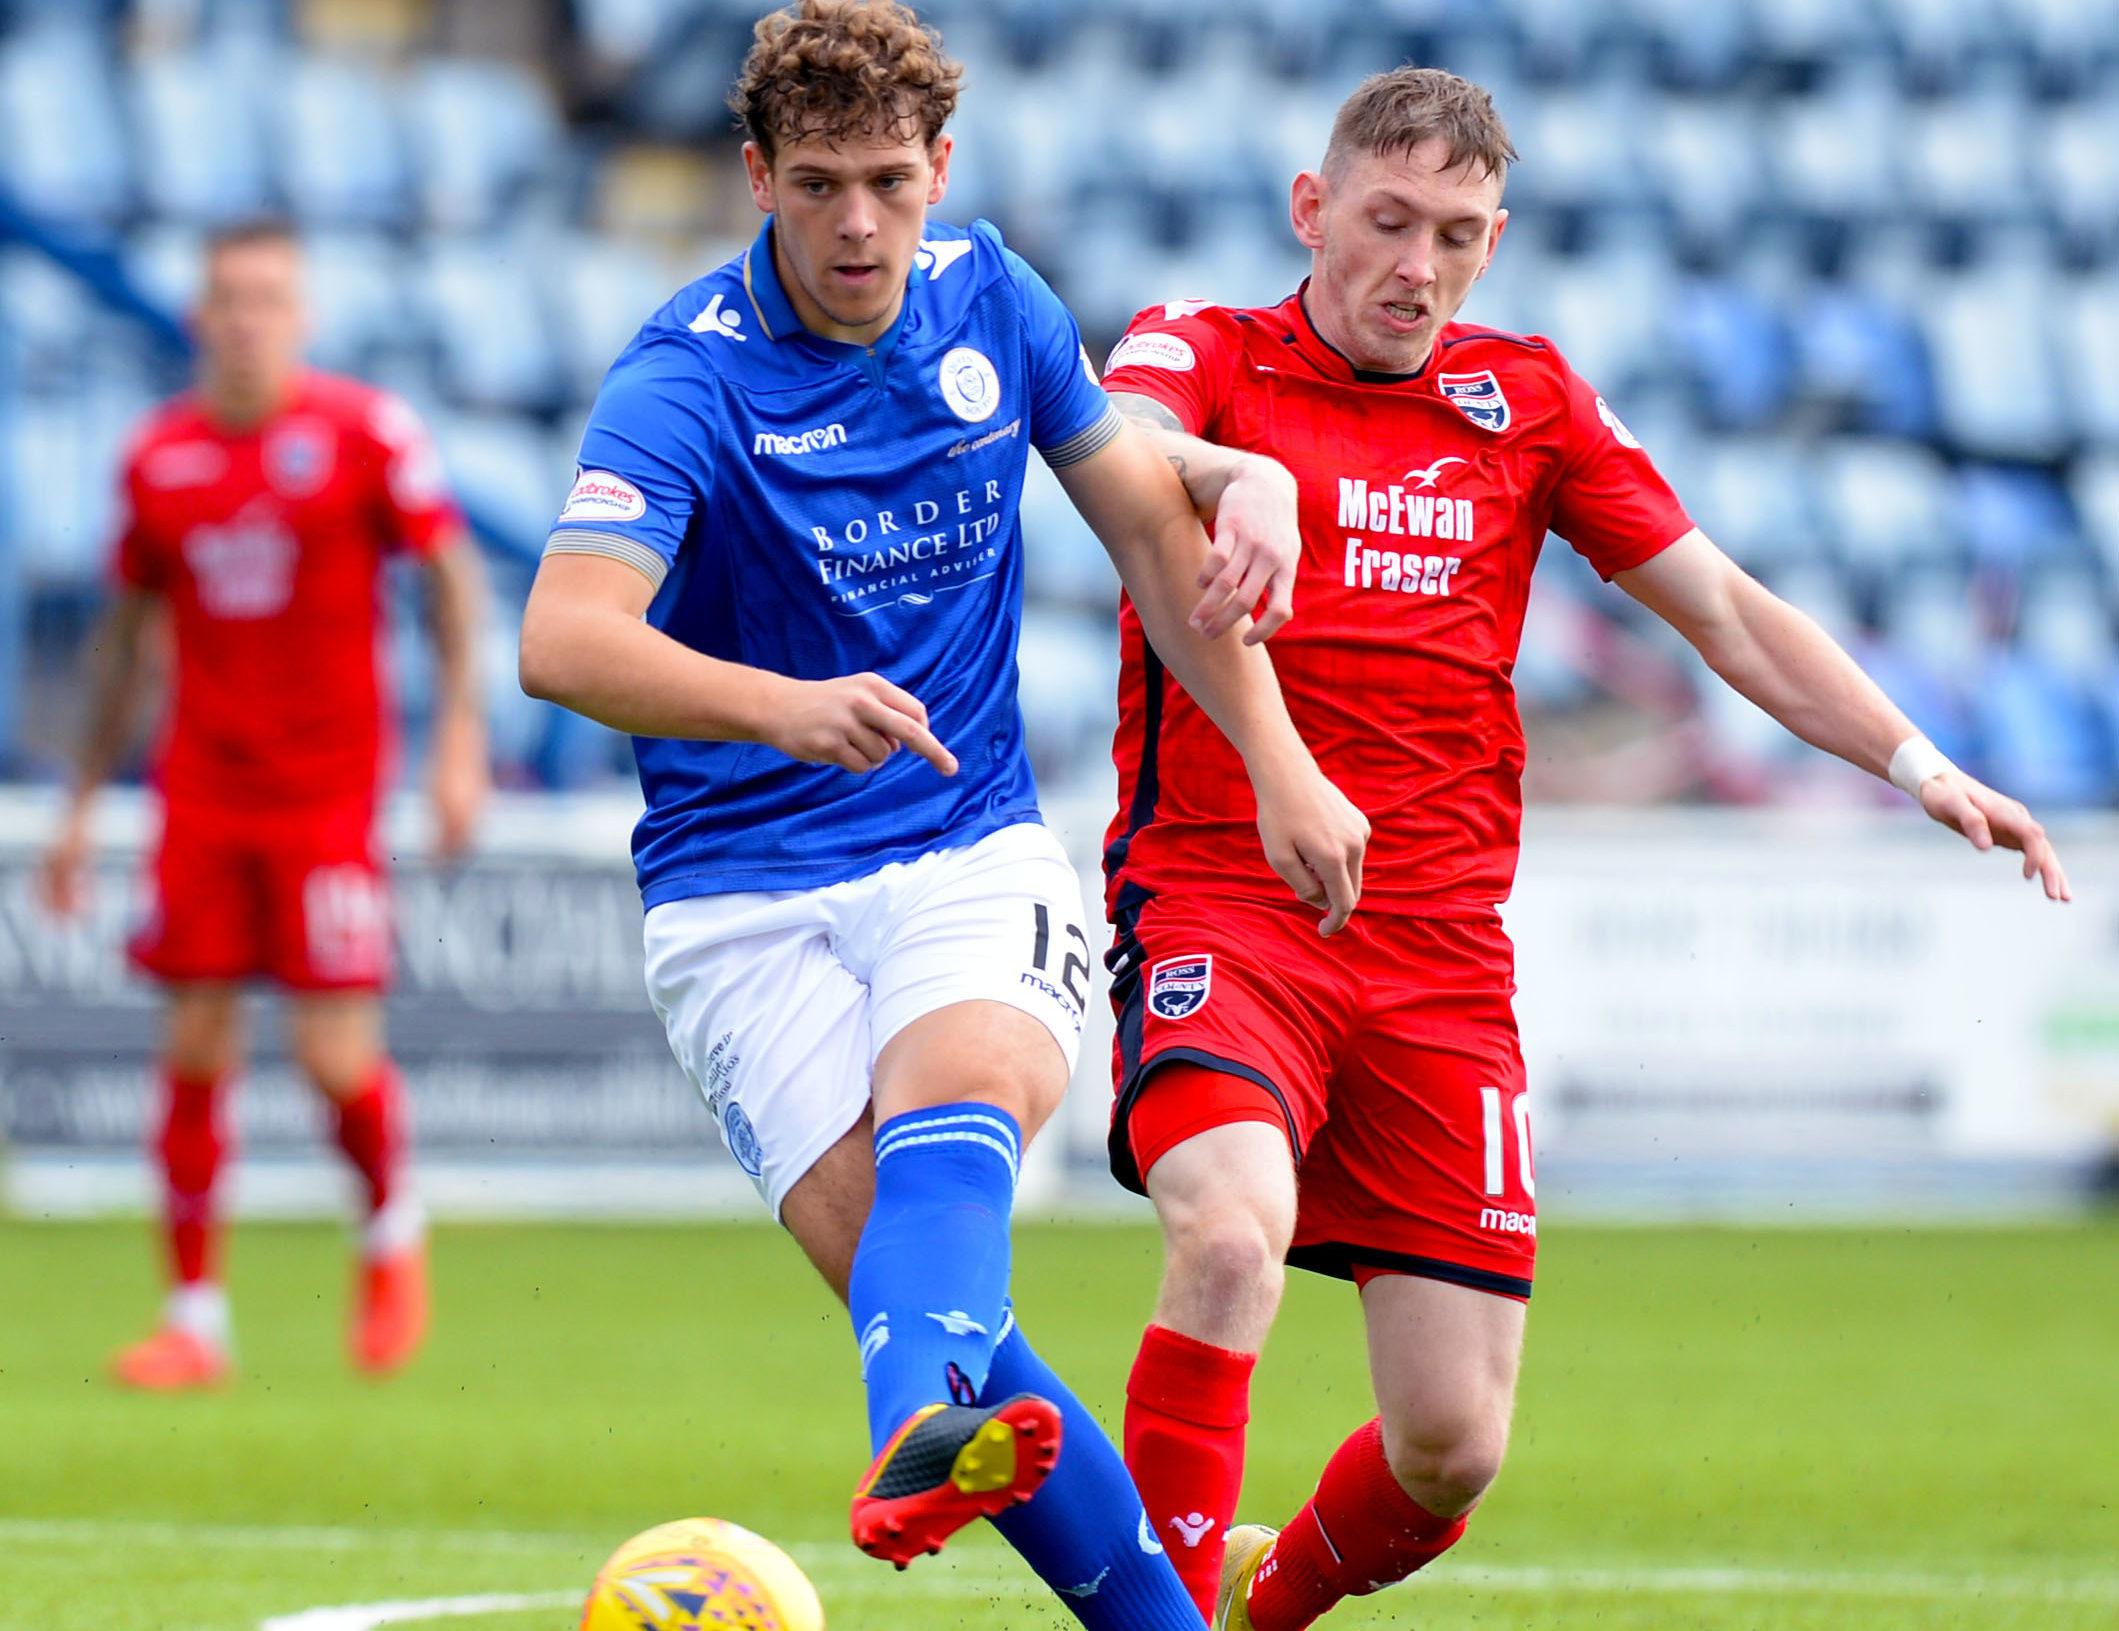 Callum Semple in action for Queen of the South against Ross County.